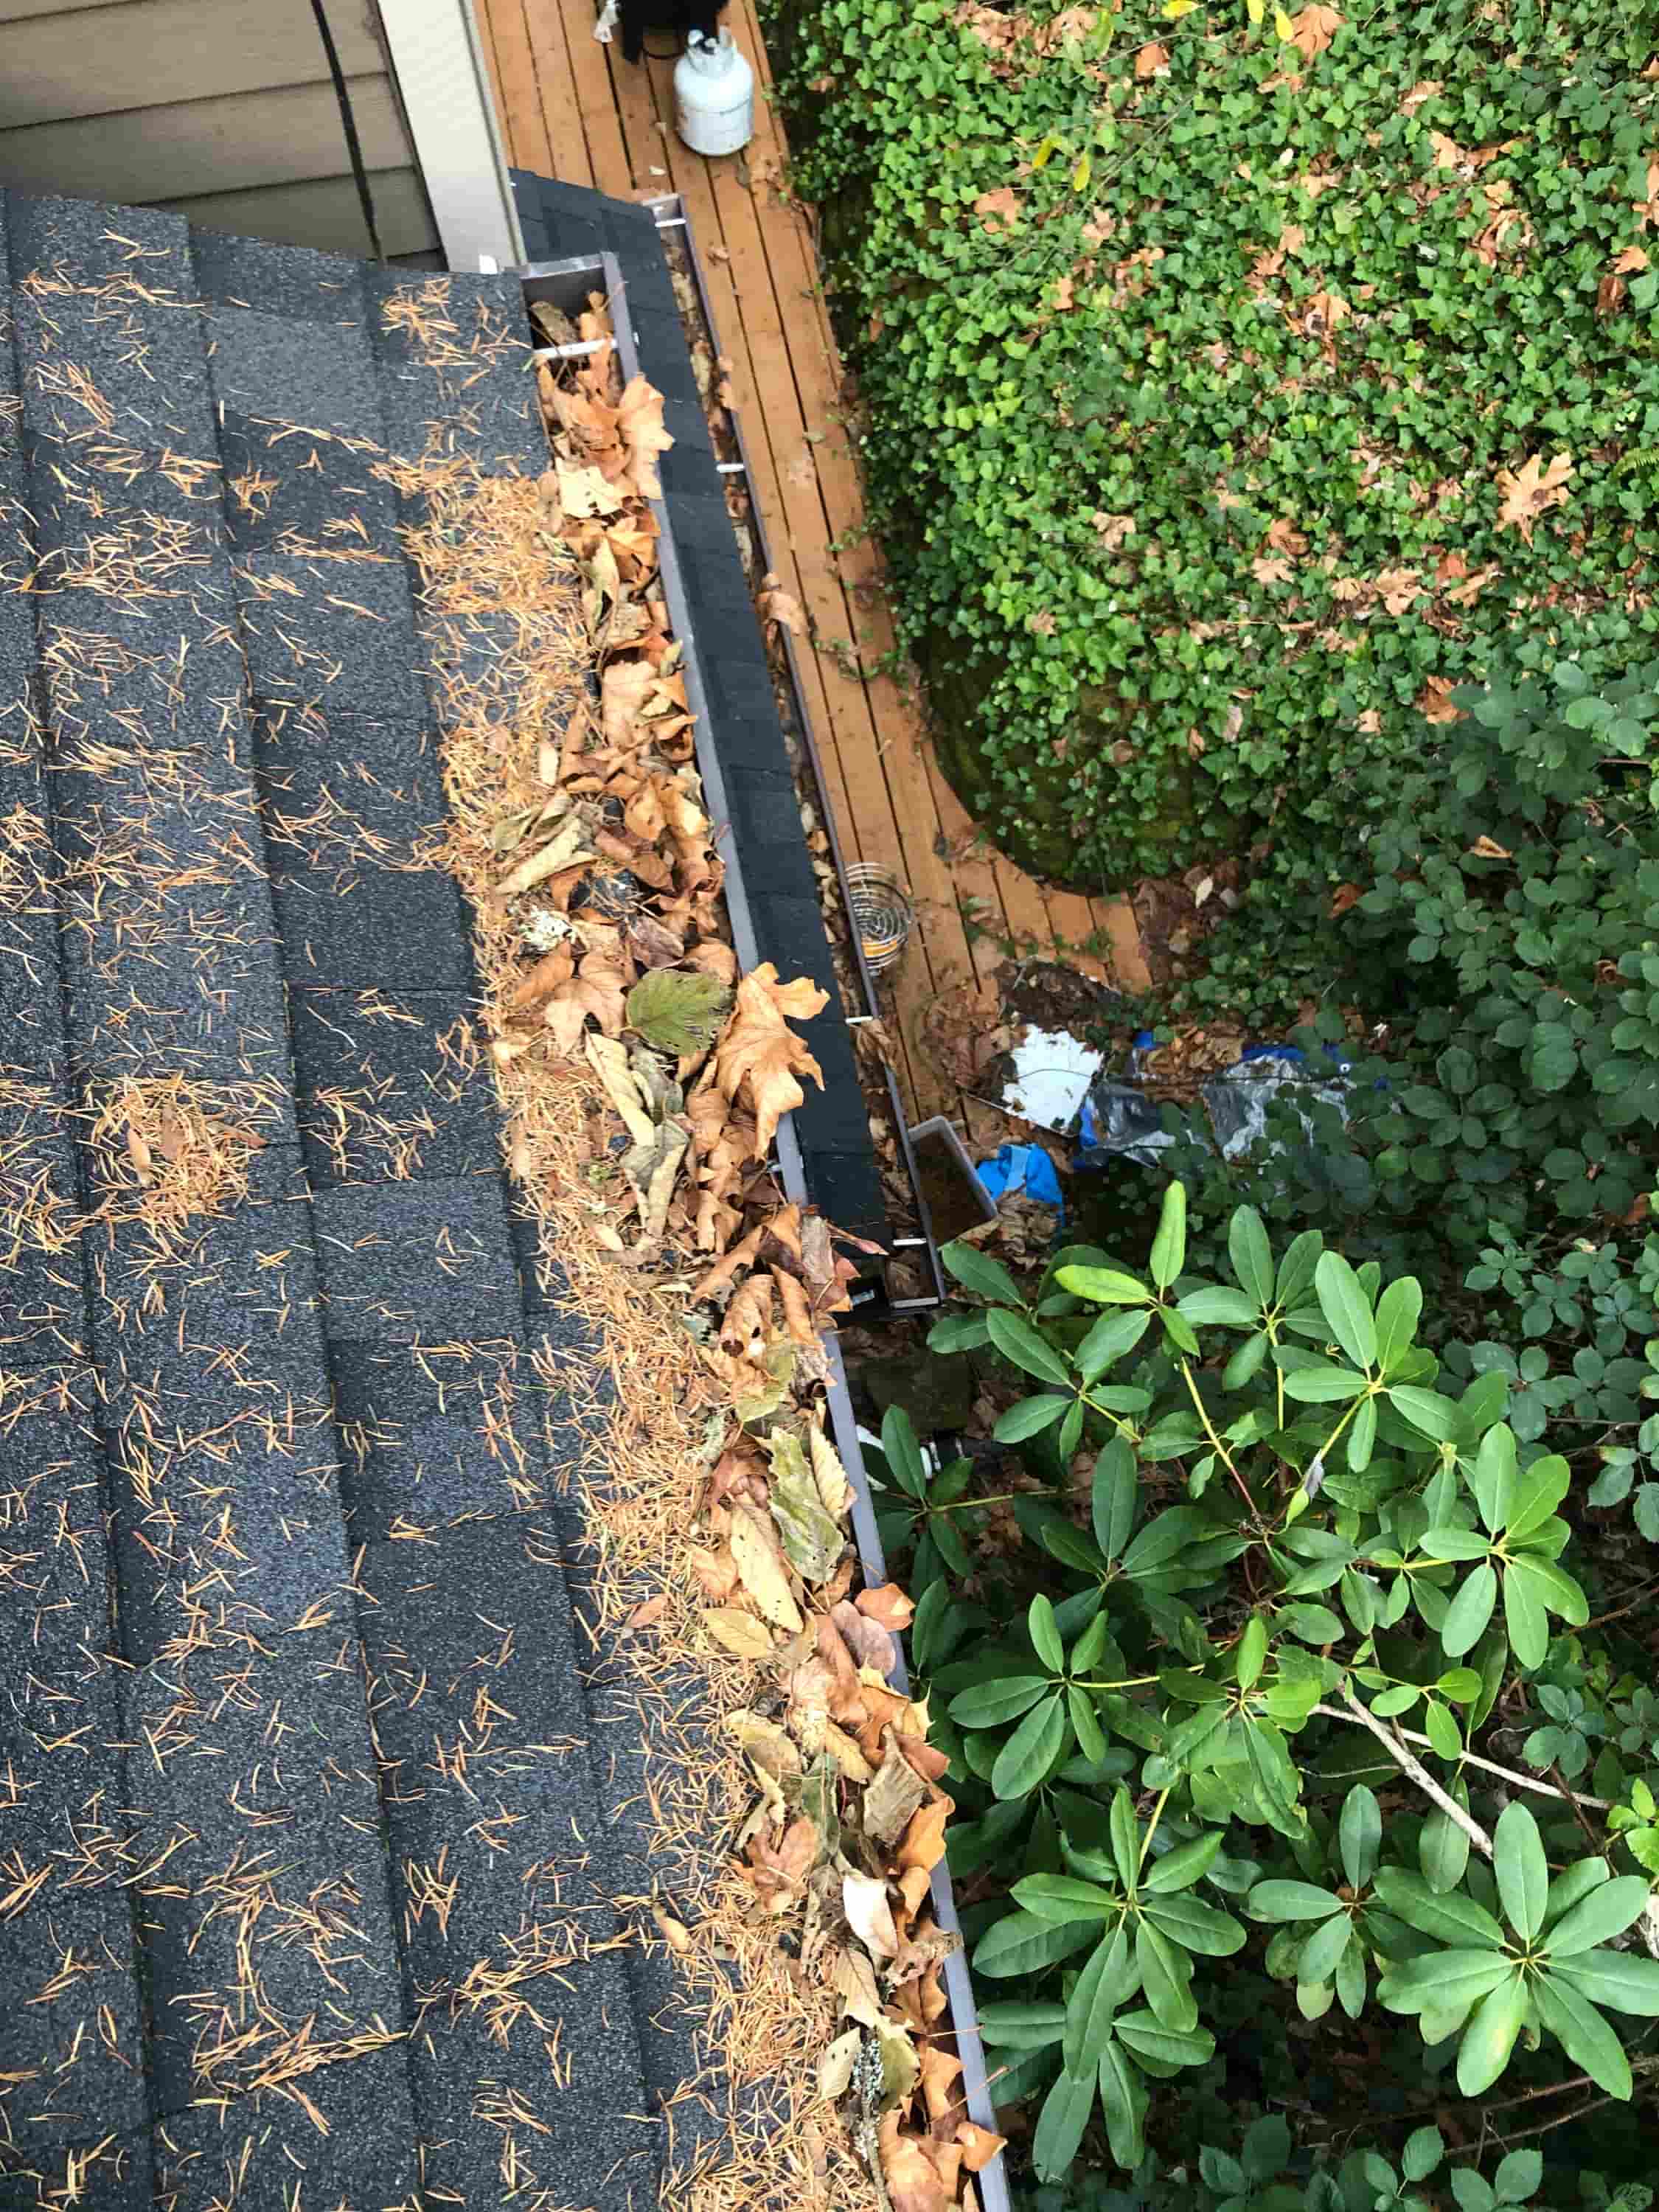 when to have gutters cleaned